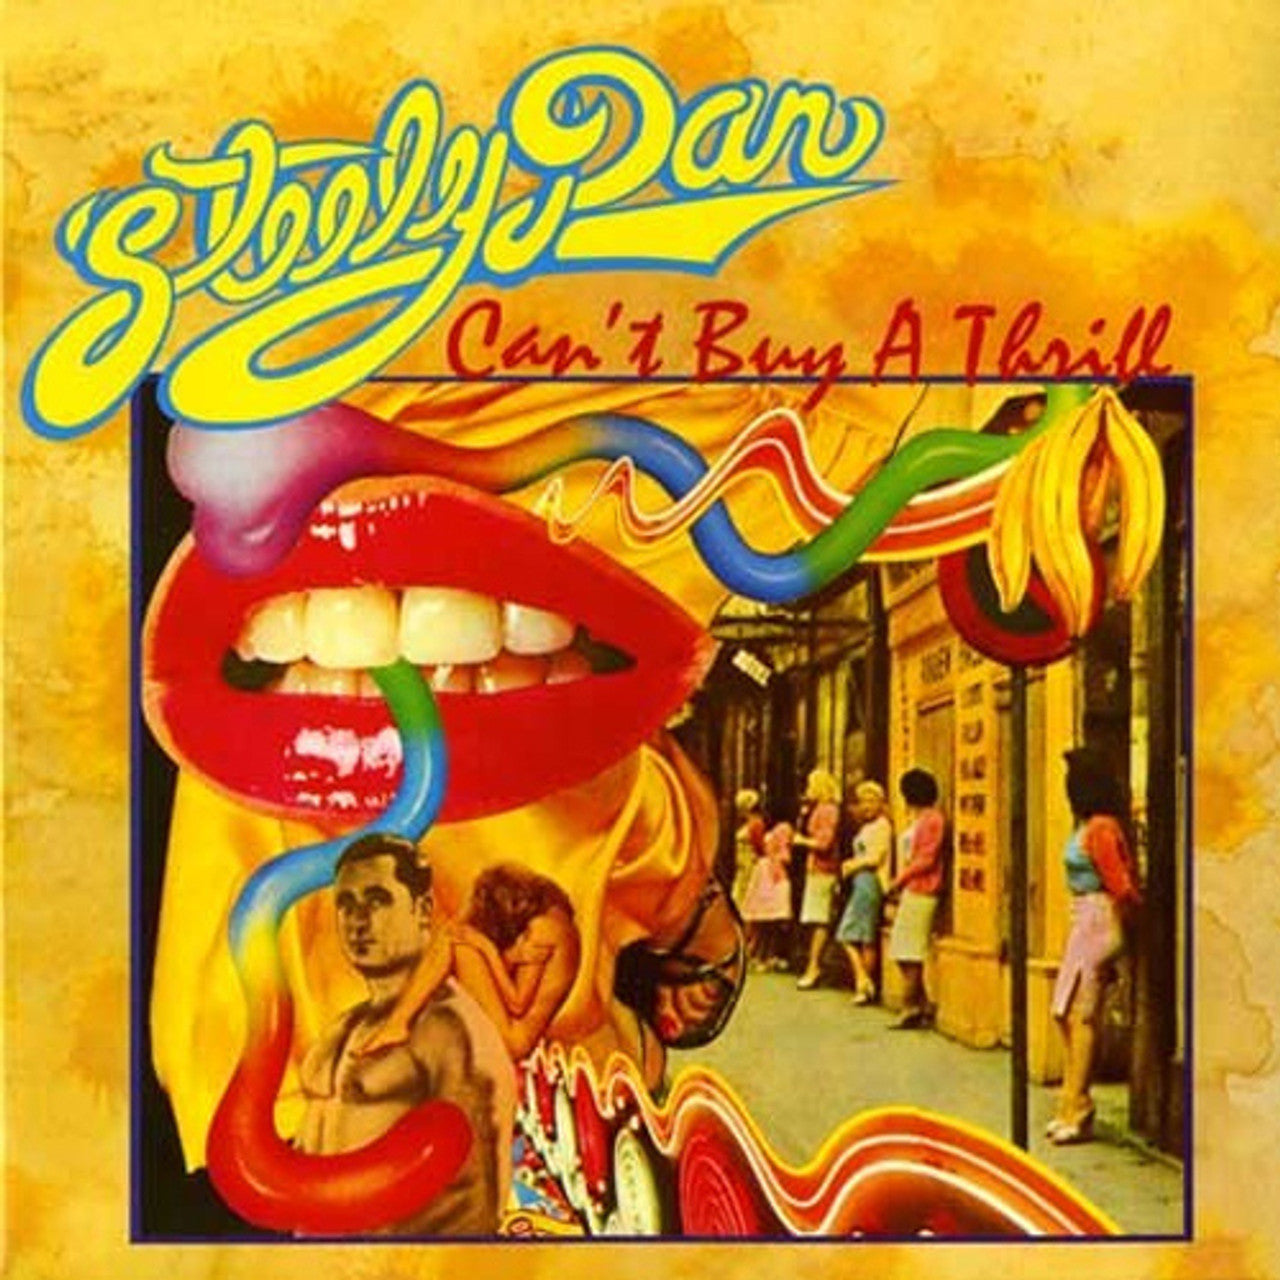 Steely Dan – Can't Buy a Thrill – LP